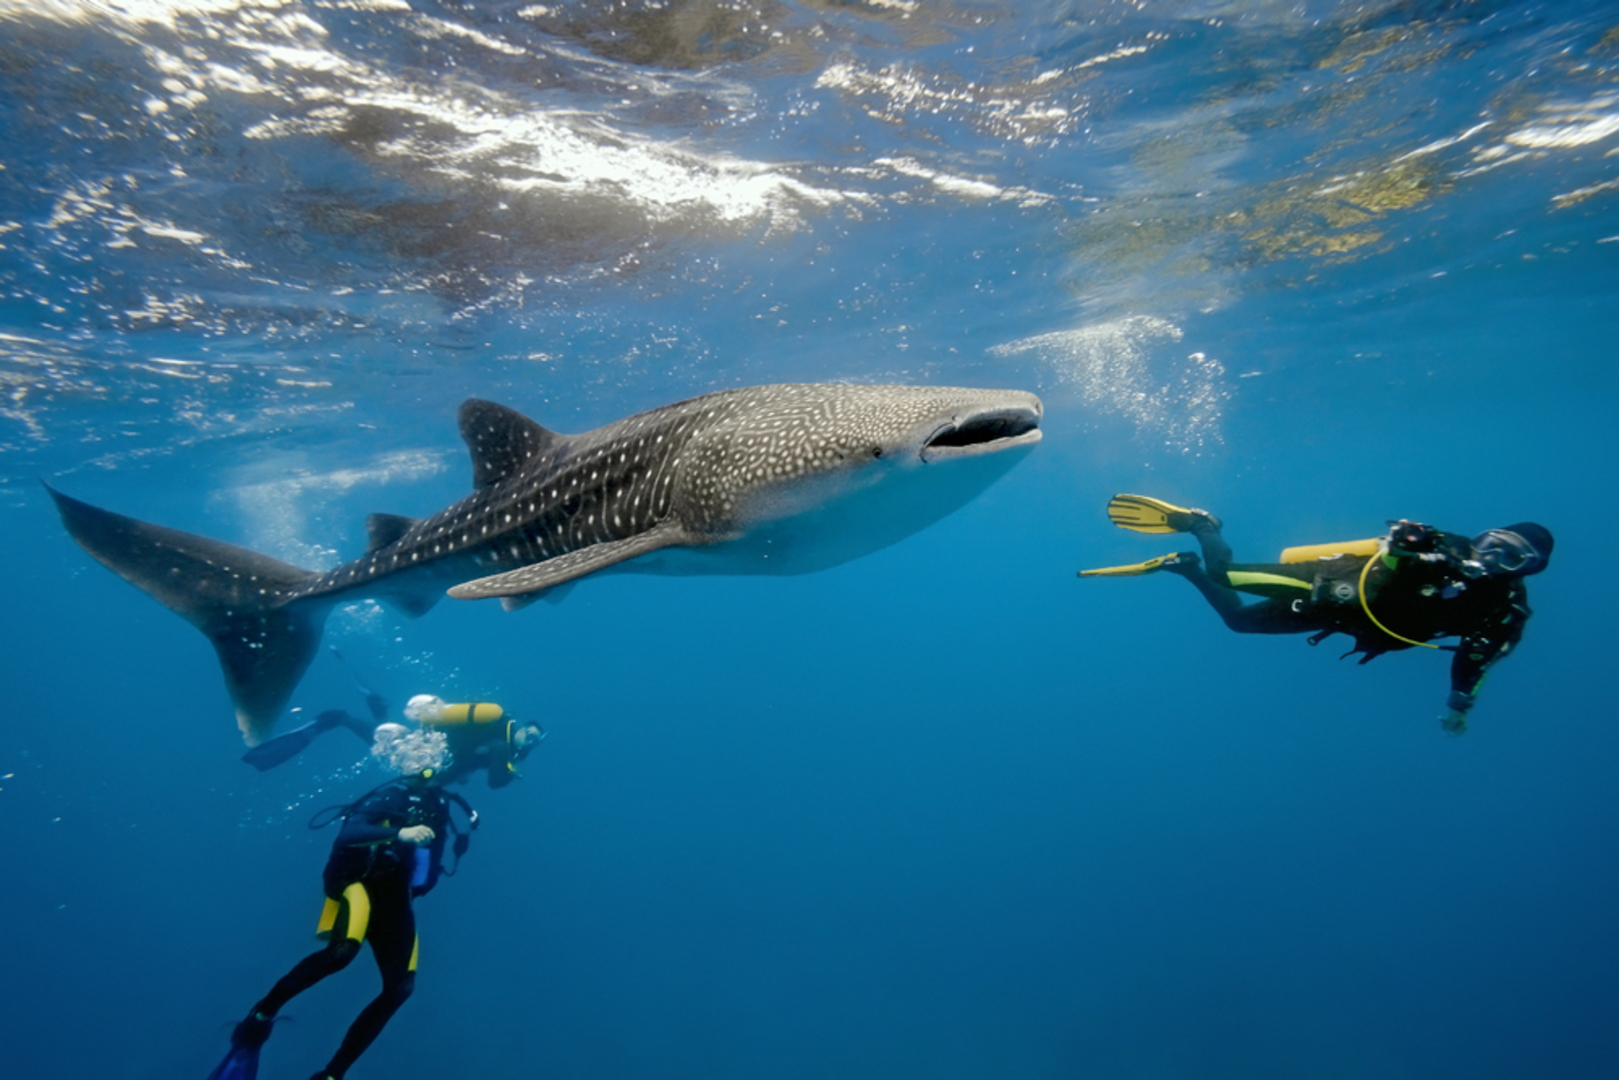 Swimming with sharks in the Maldives: A scuba diver taking a photo of a whale shark